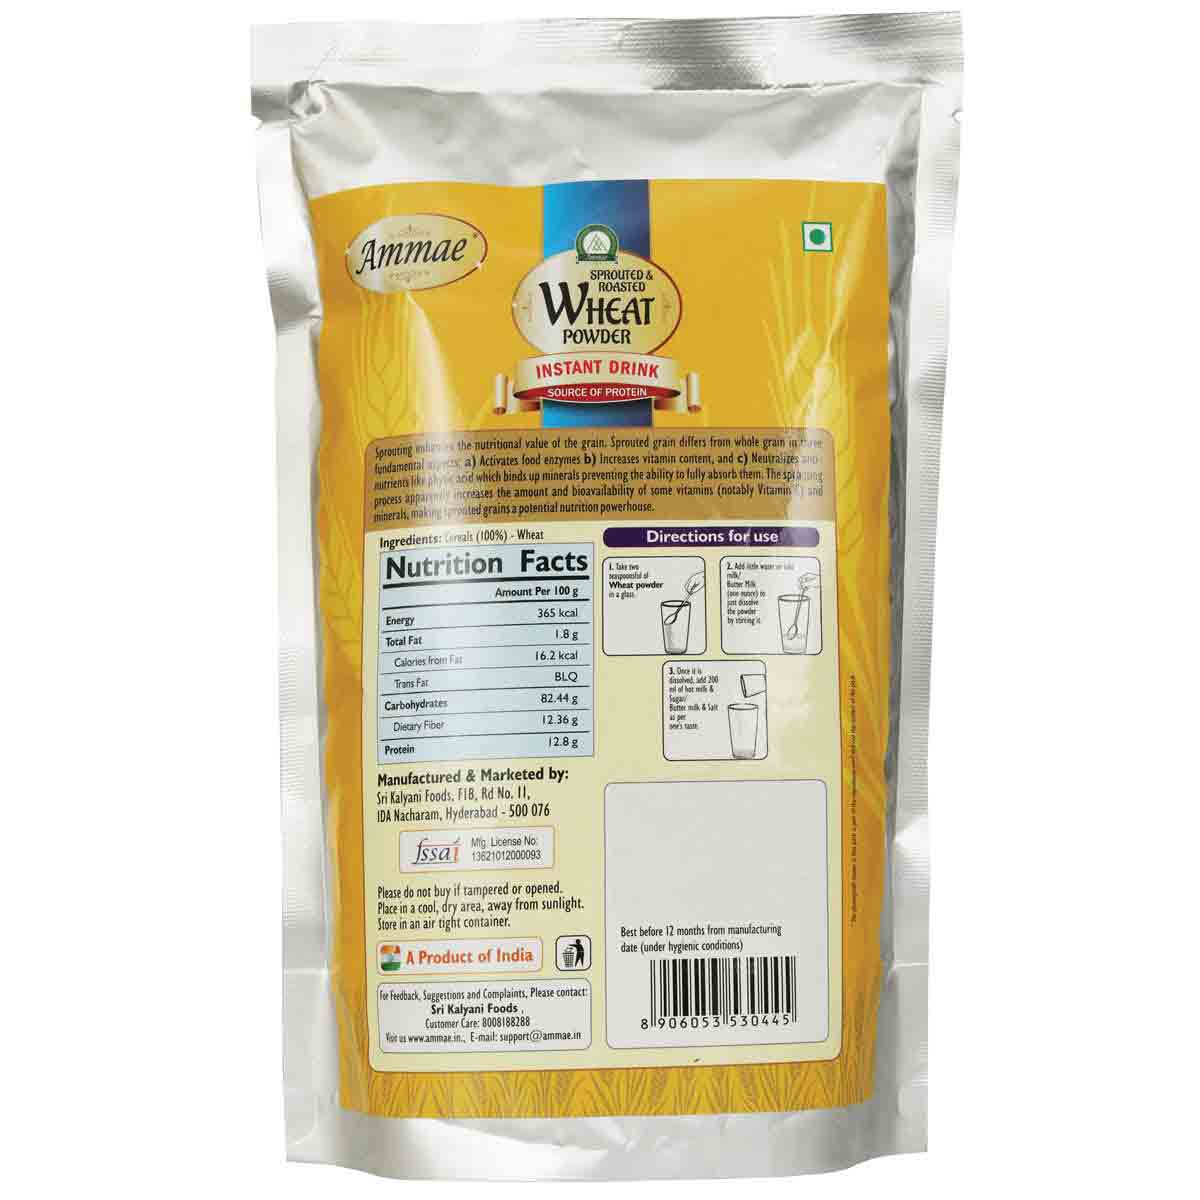 Sprouted Wheat Powder | Multigrain Instant Drink Mix - Ammae Foods India